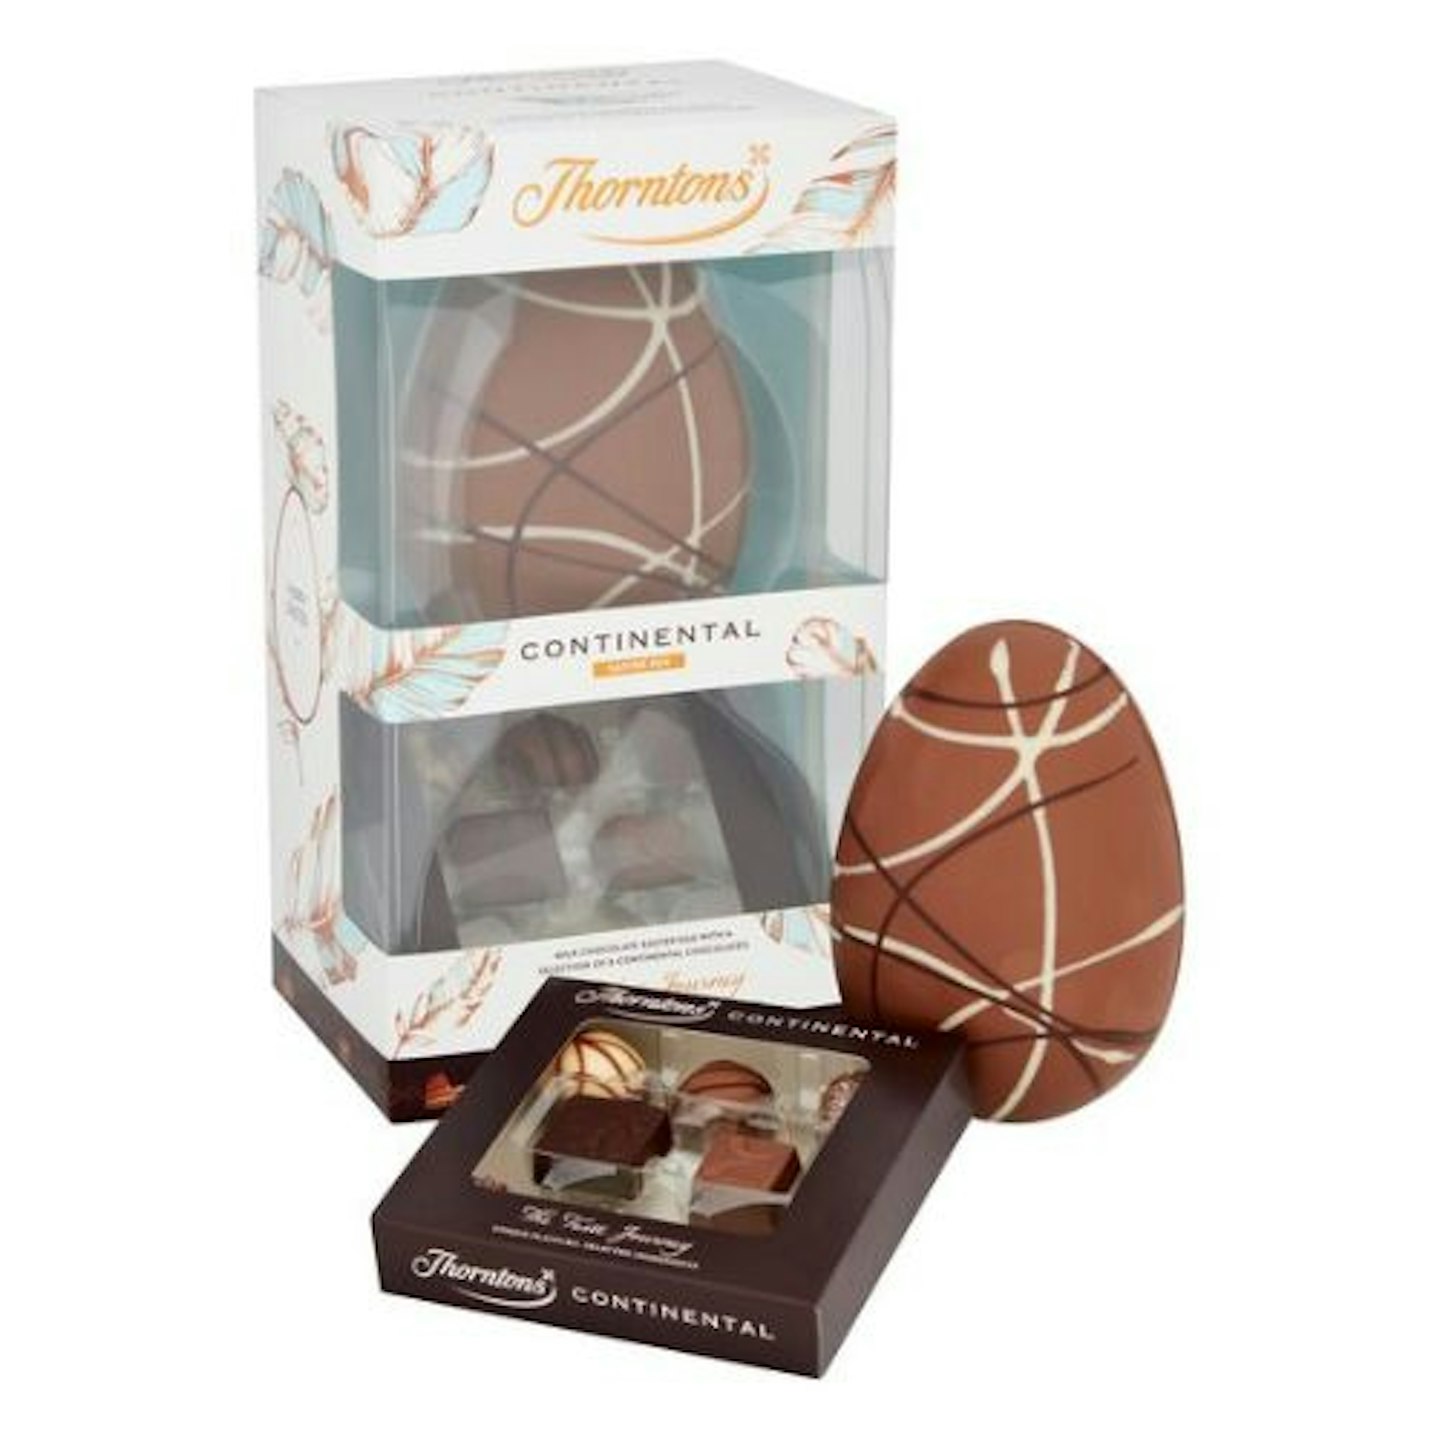 Thorntons Continental Milk Chocolate Easter Egg 257G